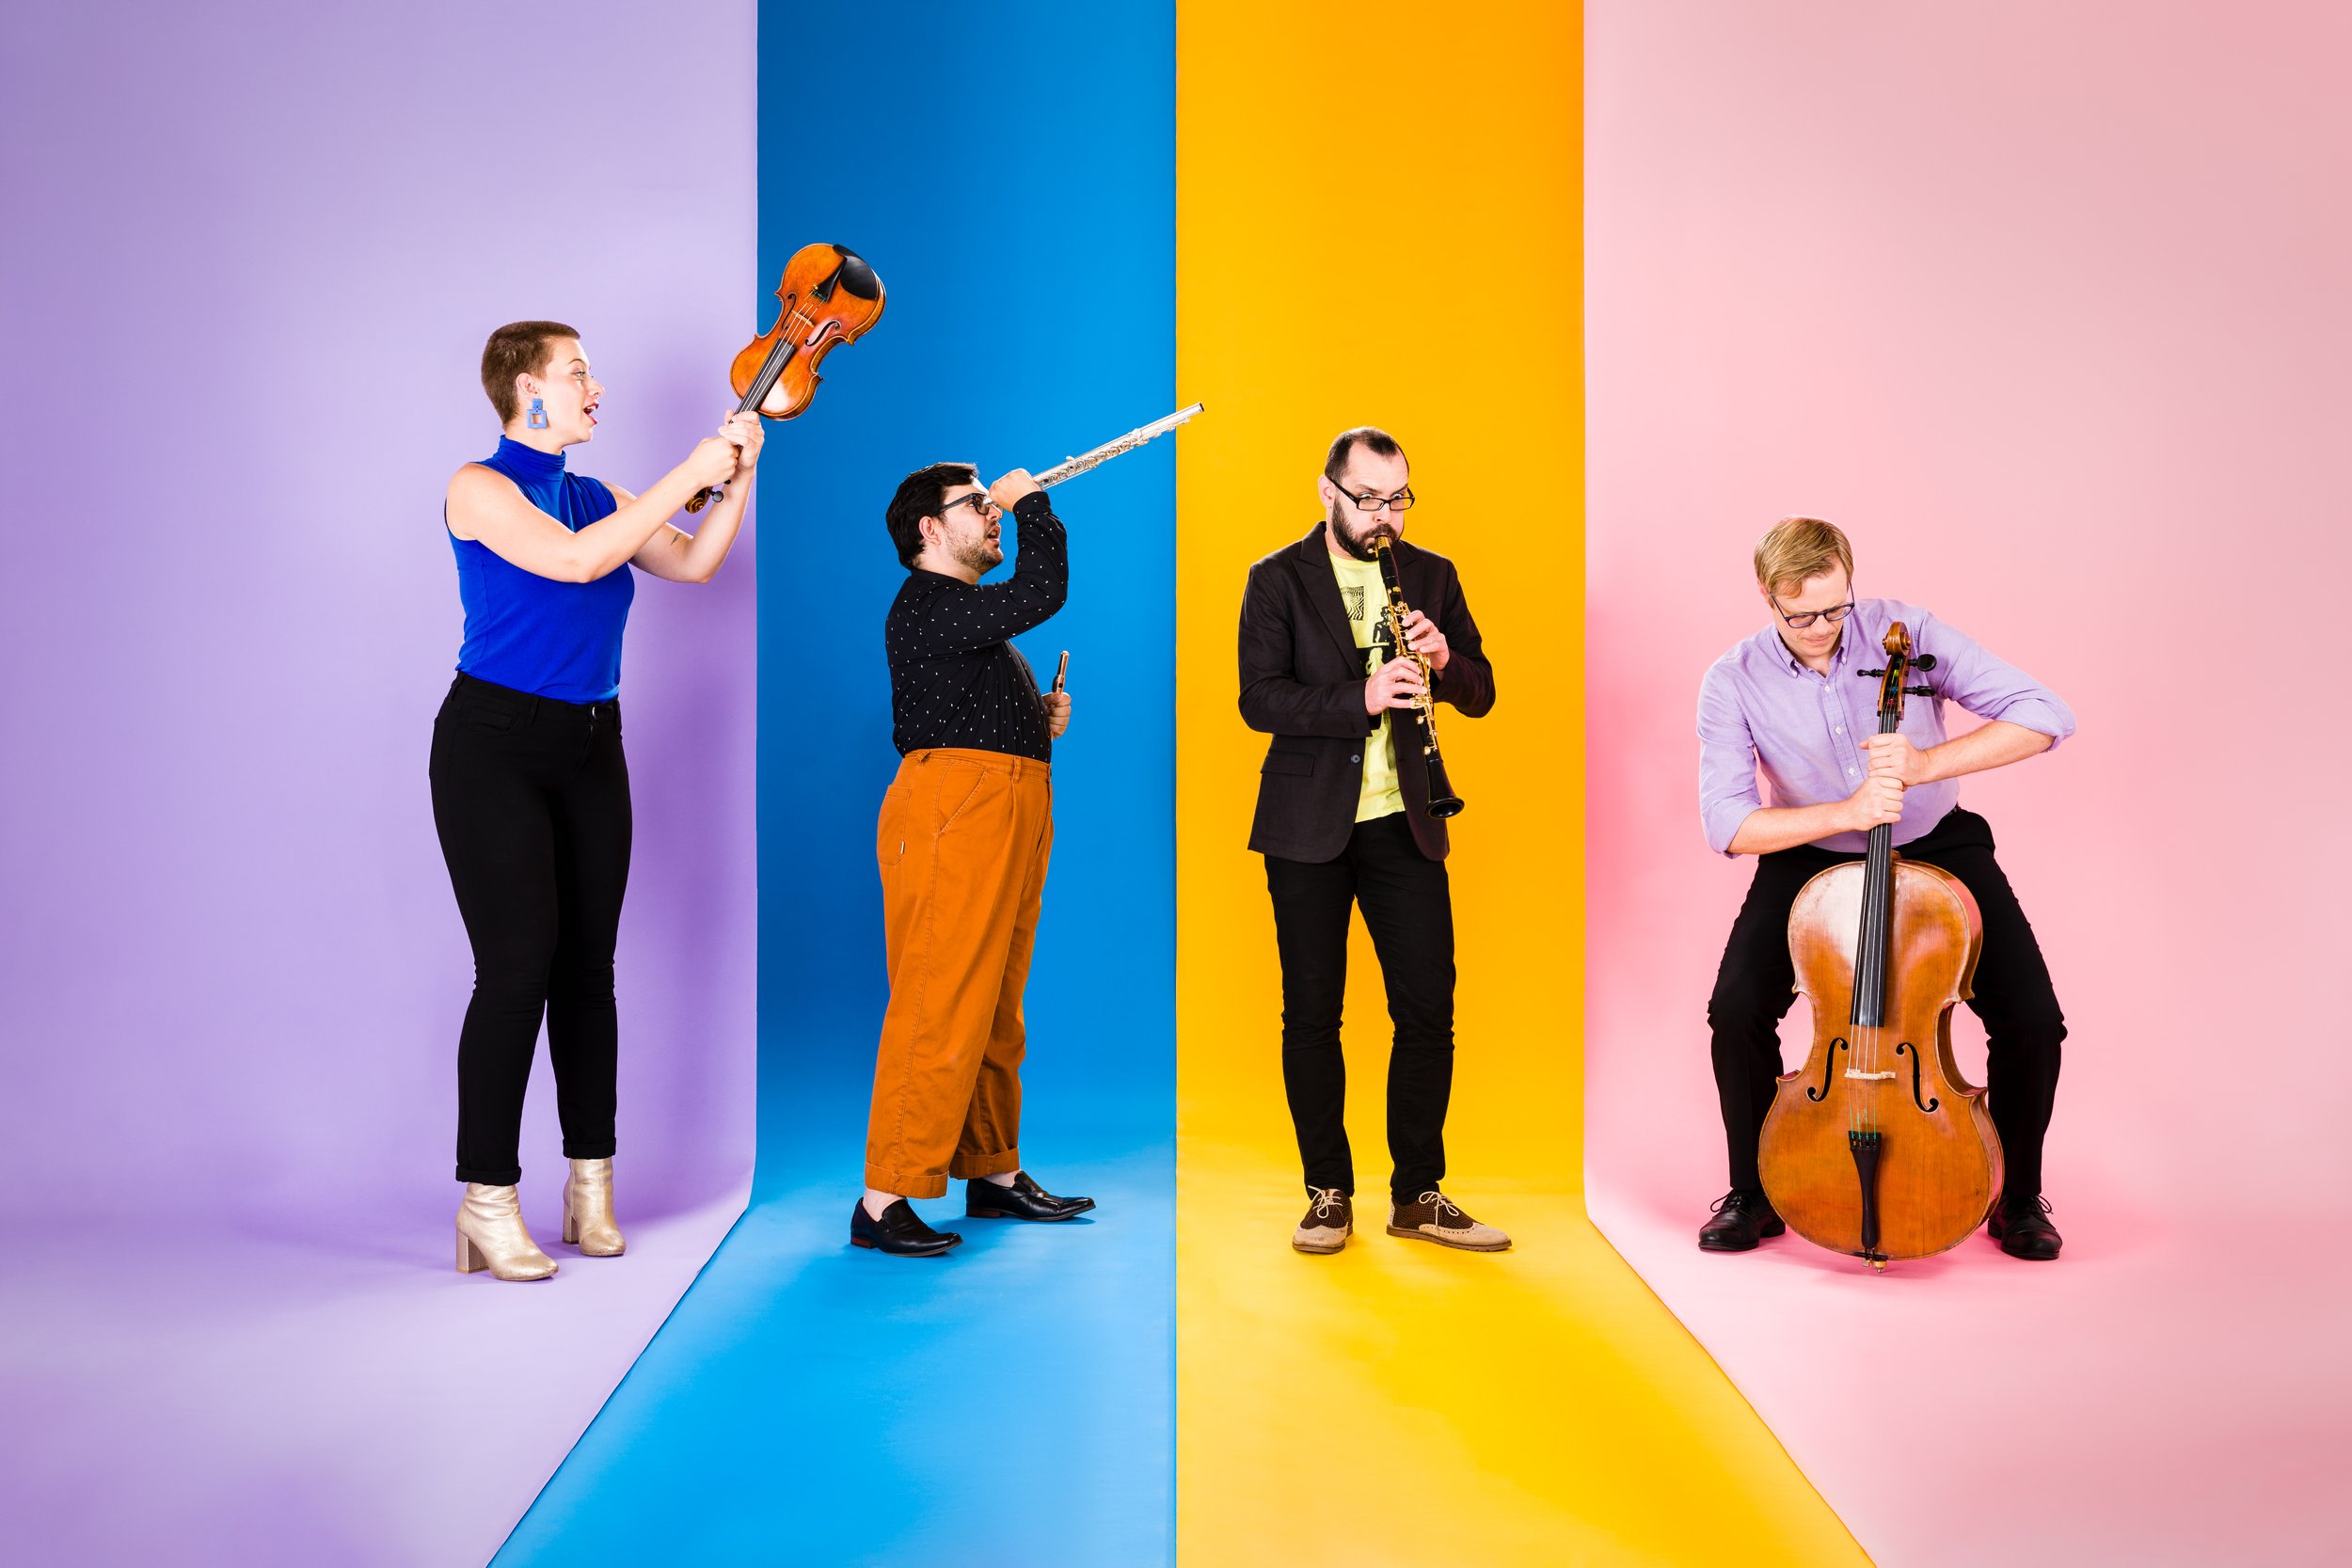 The members of HUB New Music perform their various instruments against a colorful, segmented background.